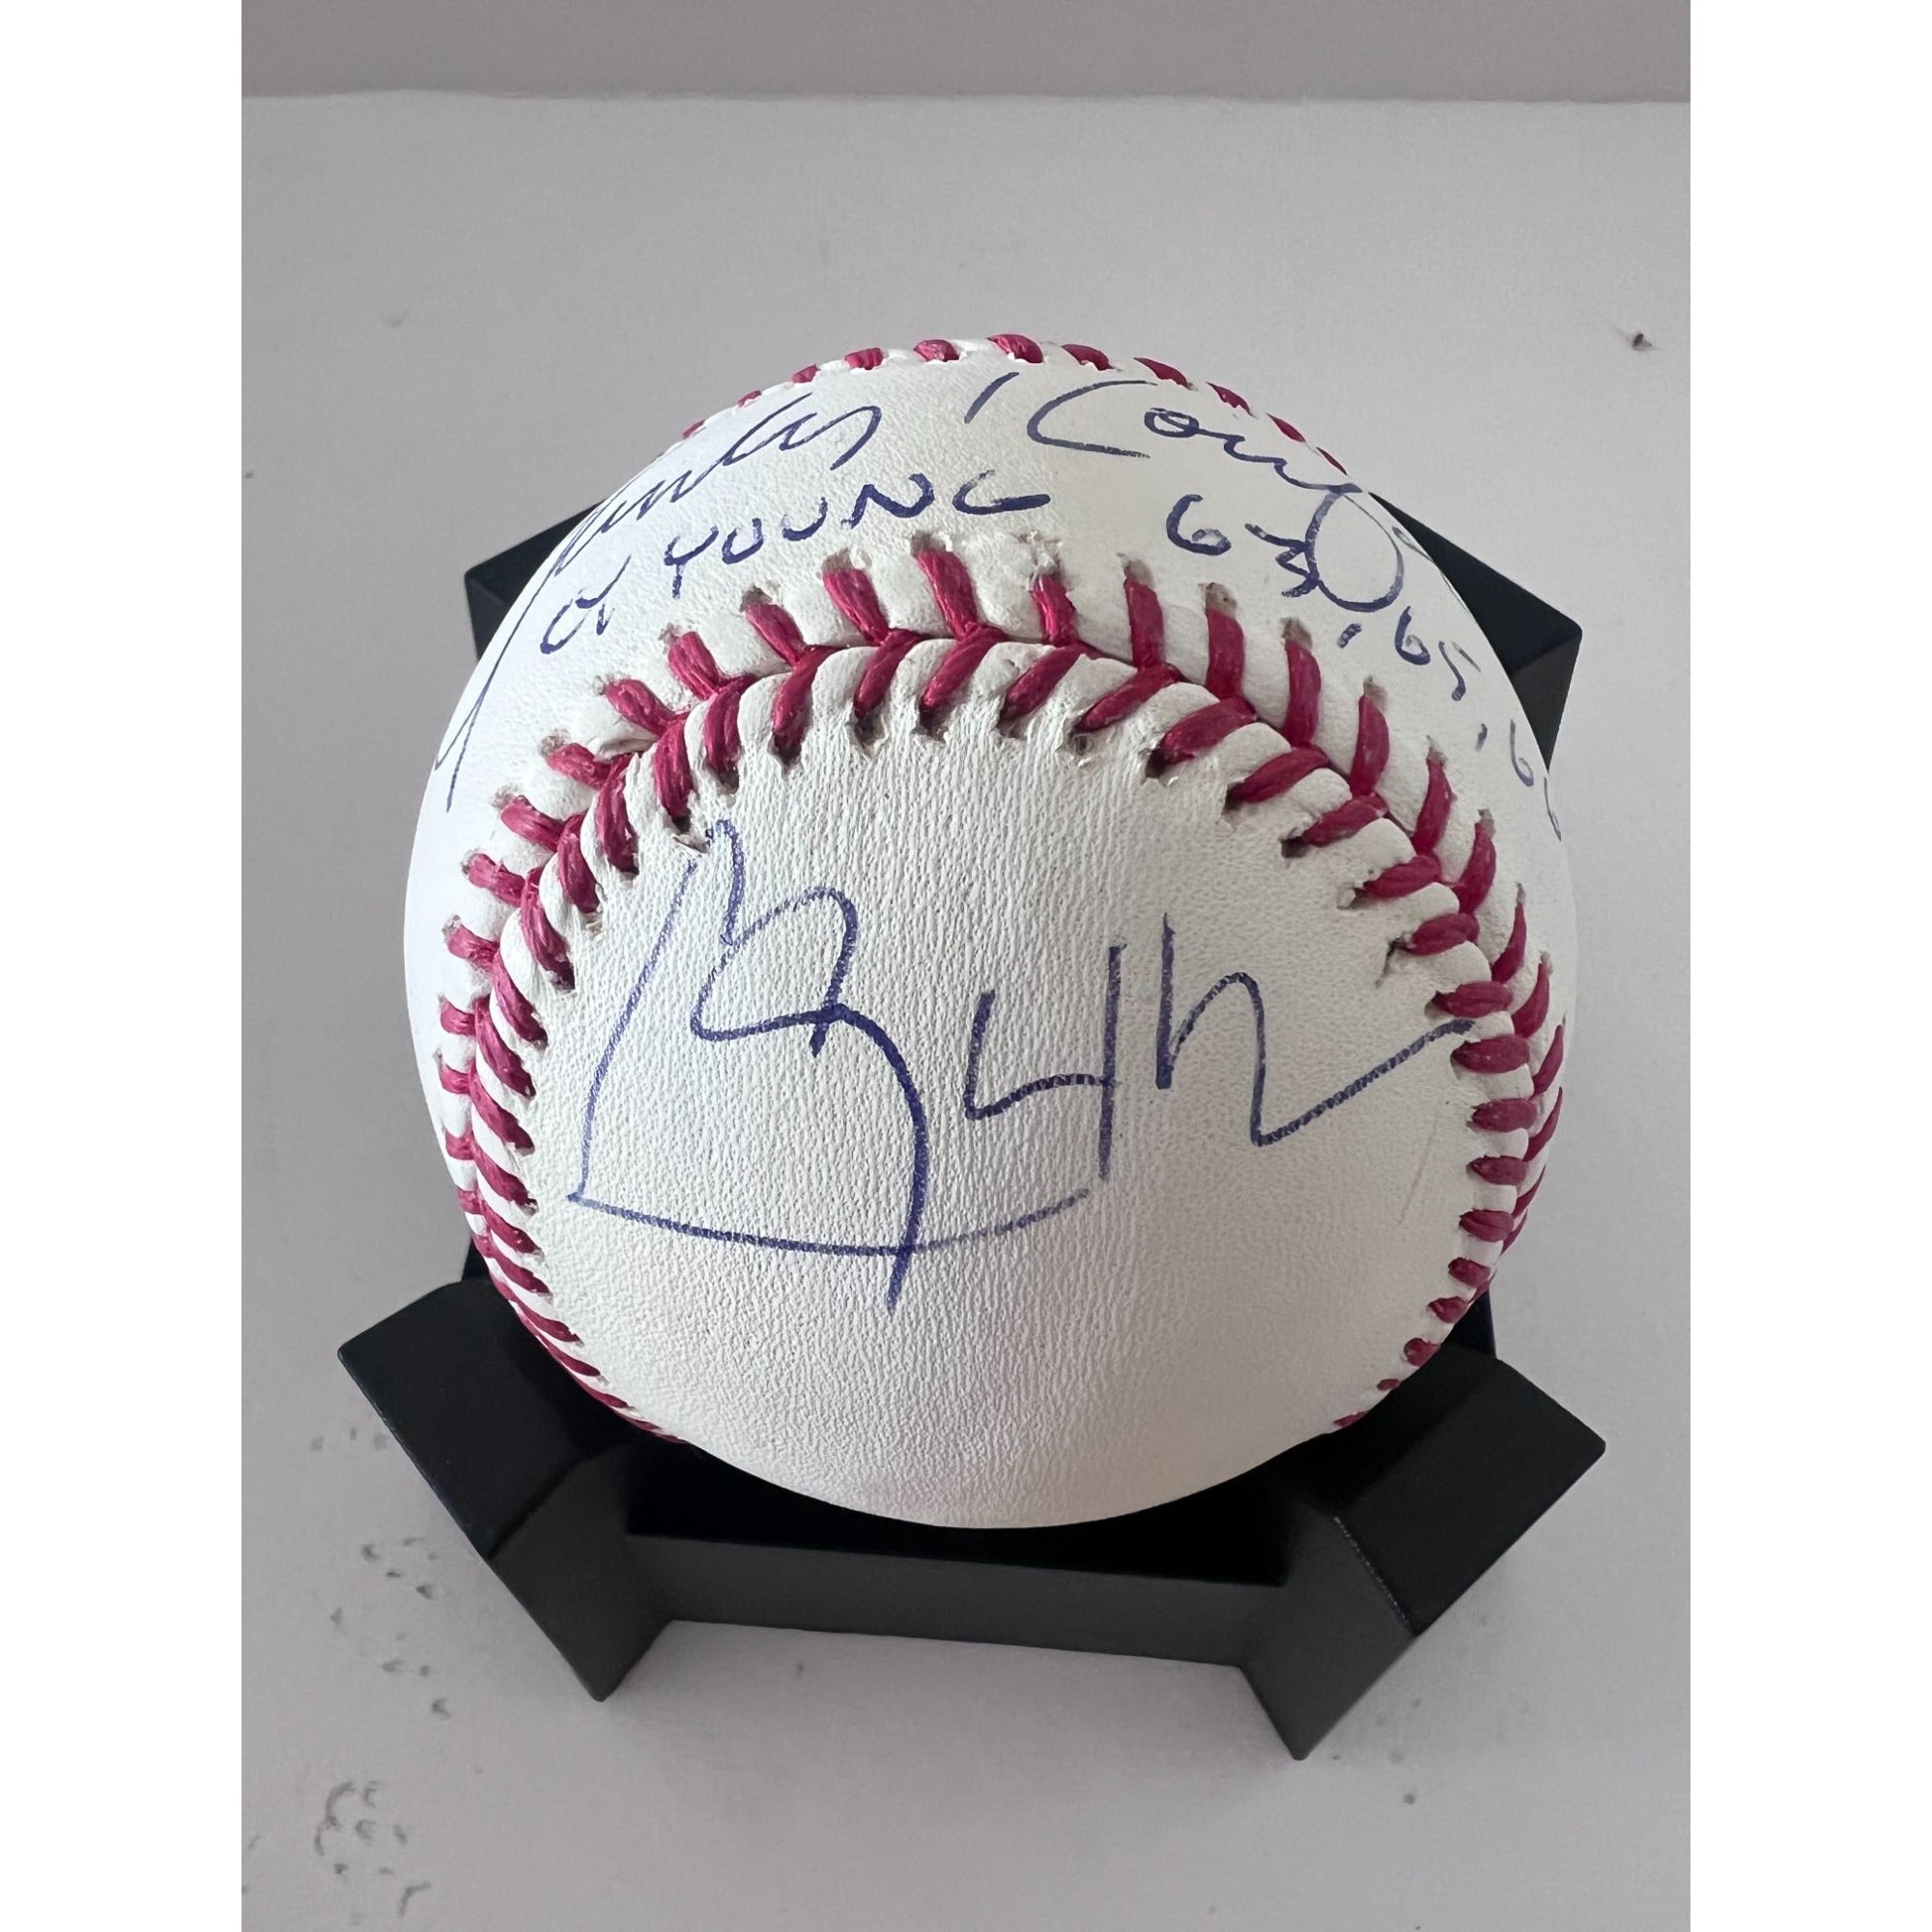 Sandy Koufax Clayton Kershaw Los Angeles Dodgers Cy Young award-winning pitchers baseball signed.& inscribed with proof